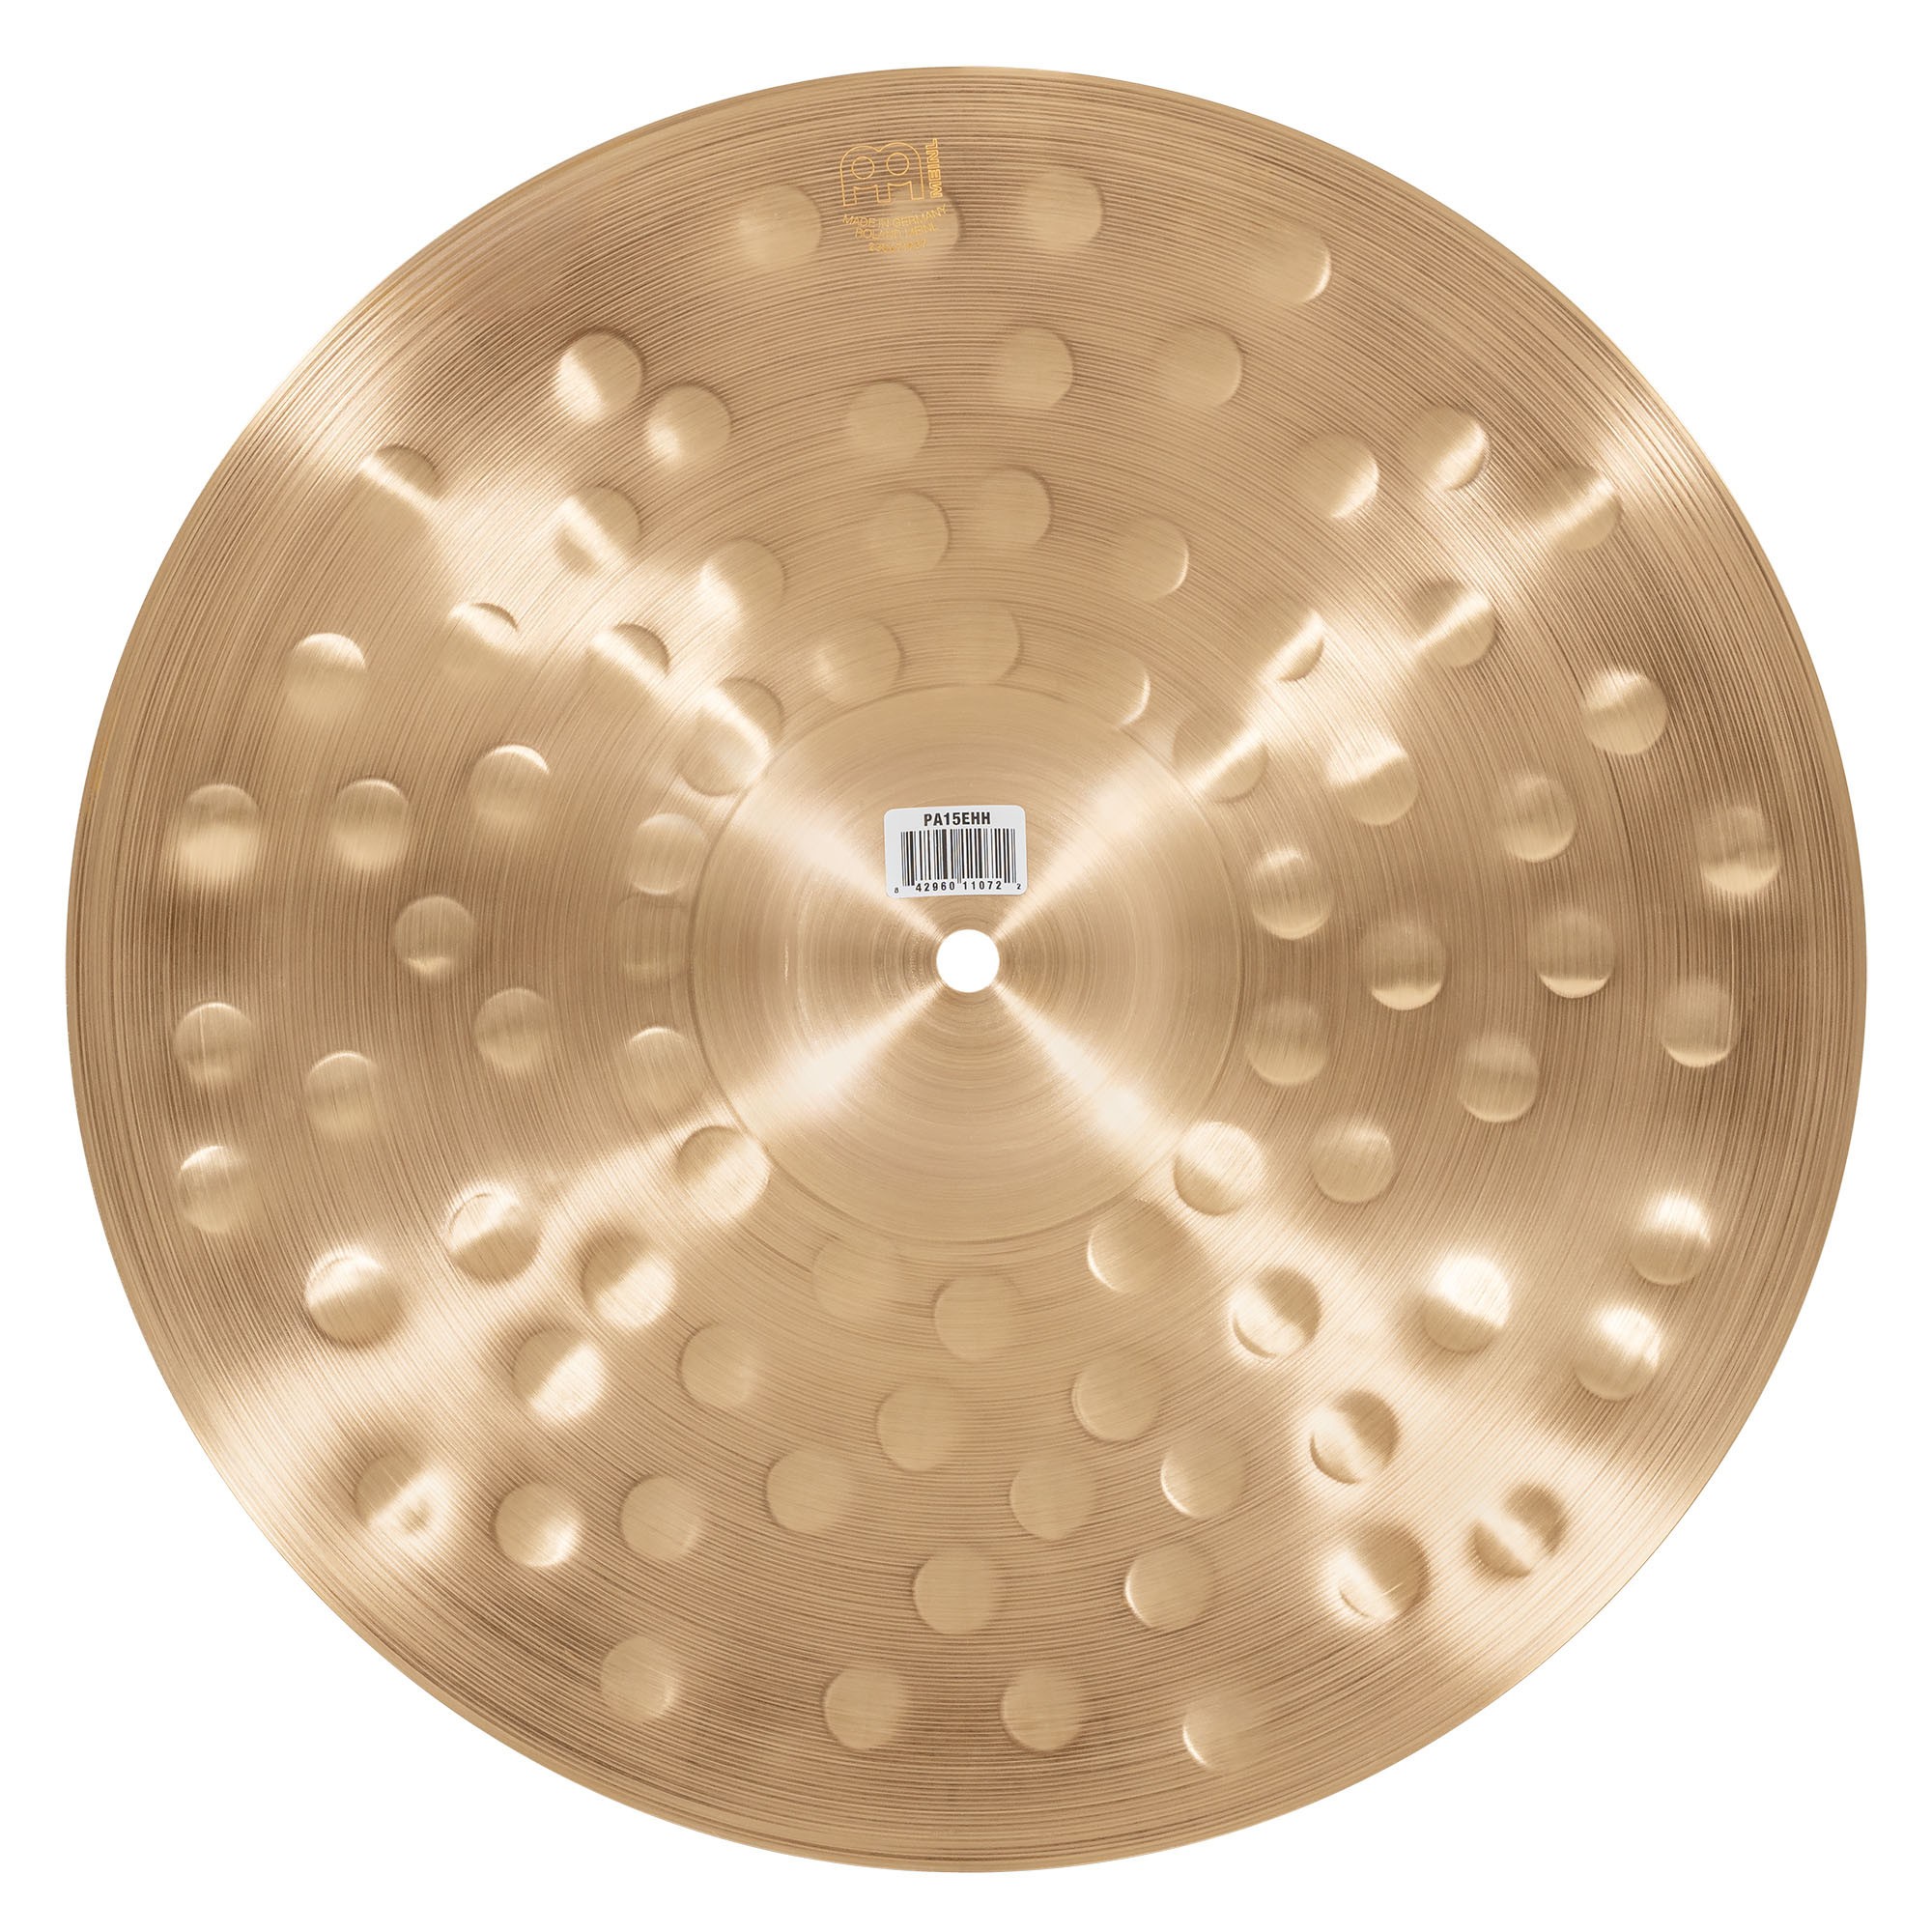 Meinl Pure Alloy 15" Extra Hammered Hihat